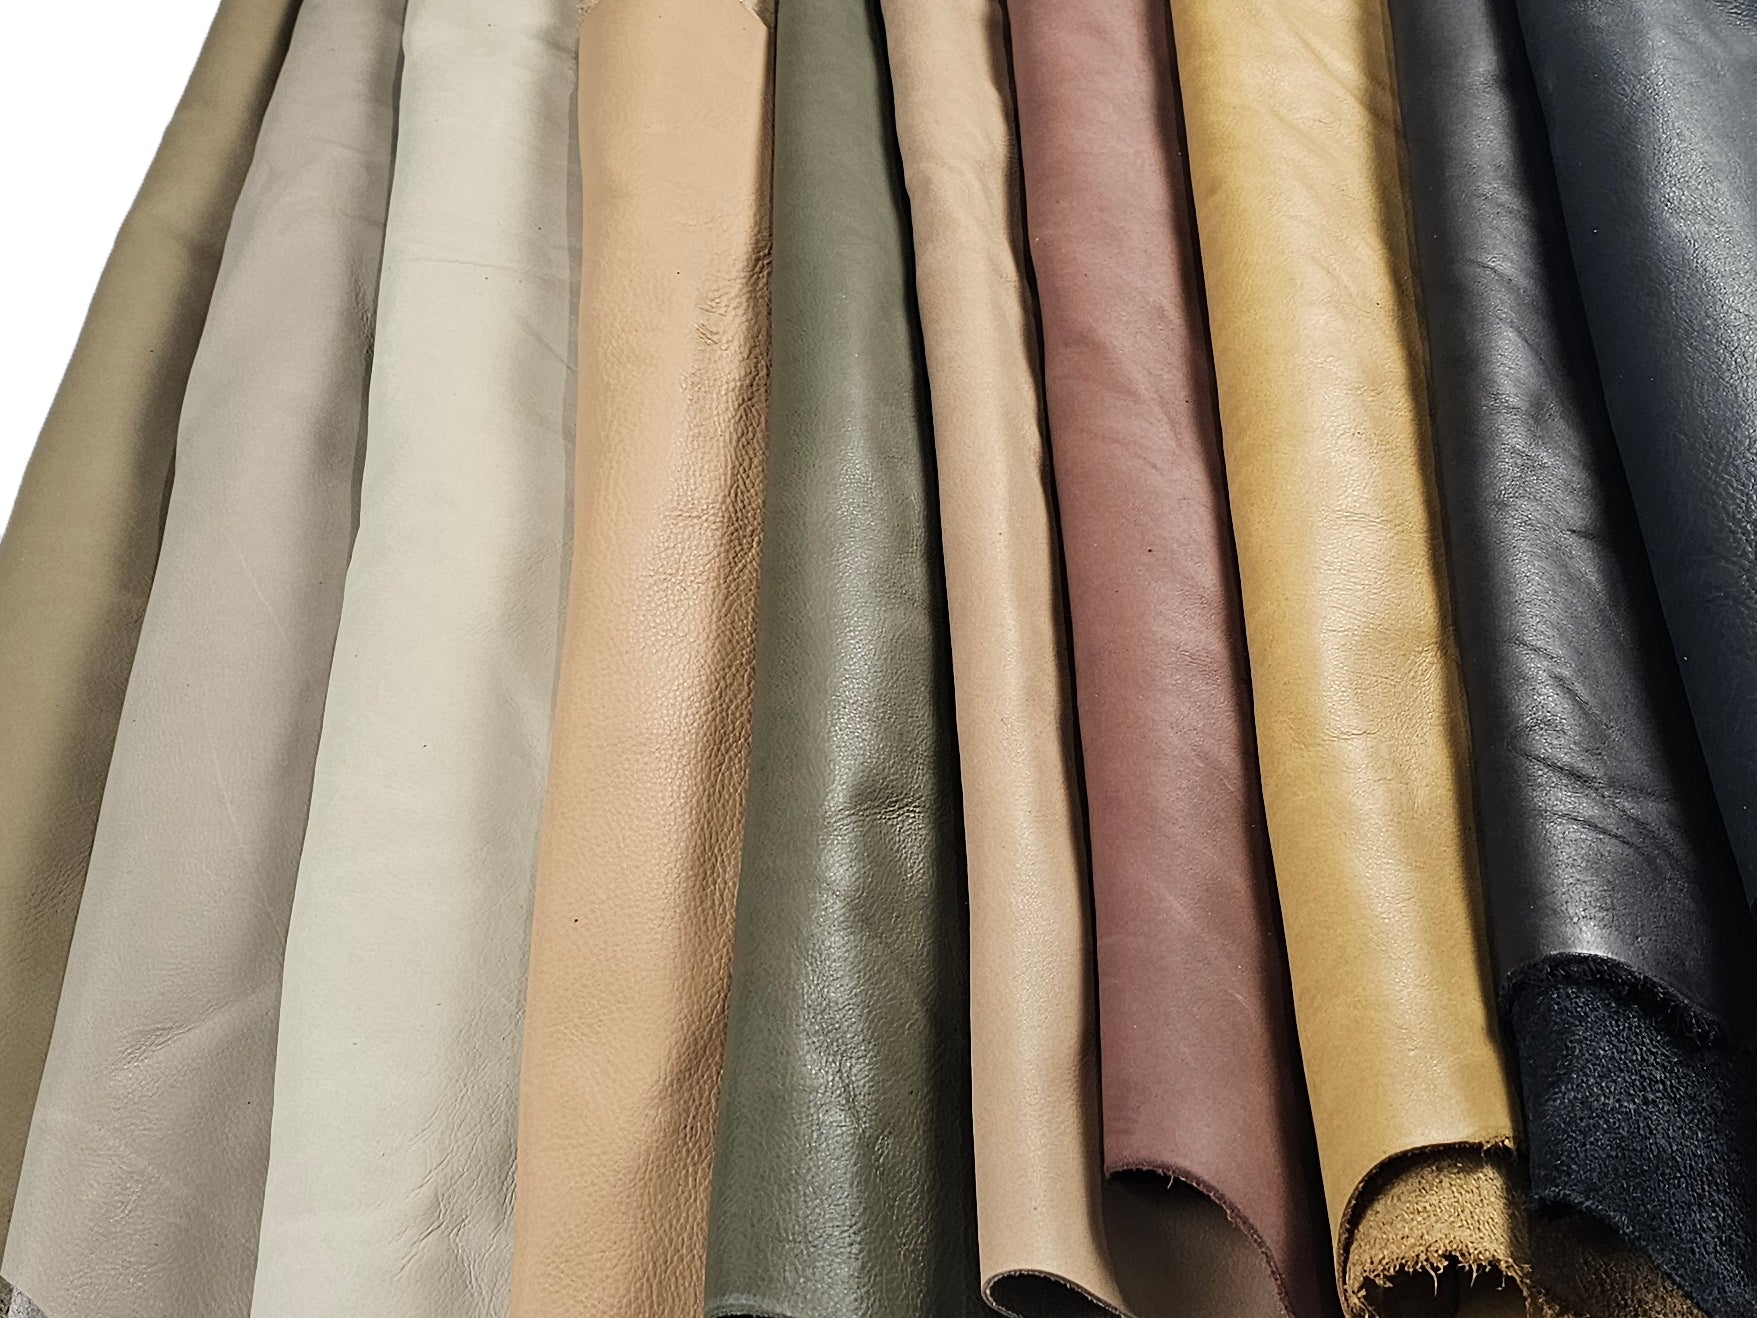 Assorted Full-grain Upholstery leather offcuts 3 - 5 sq. ft